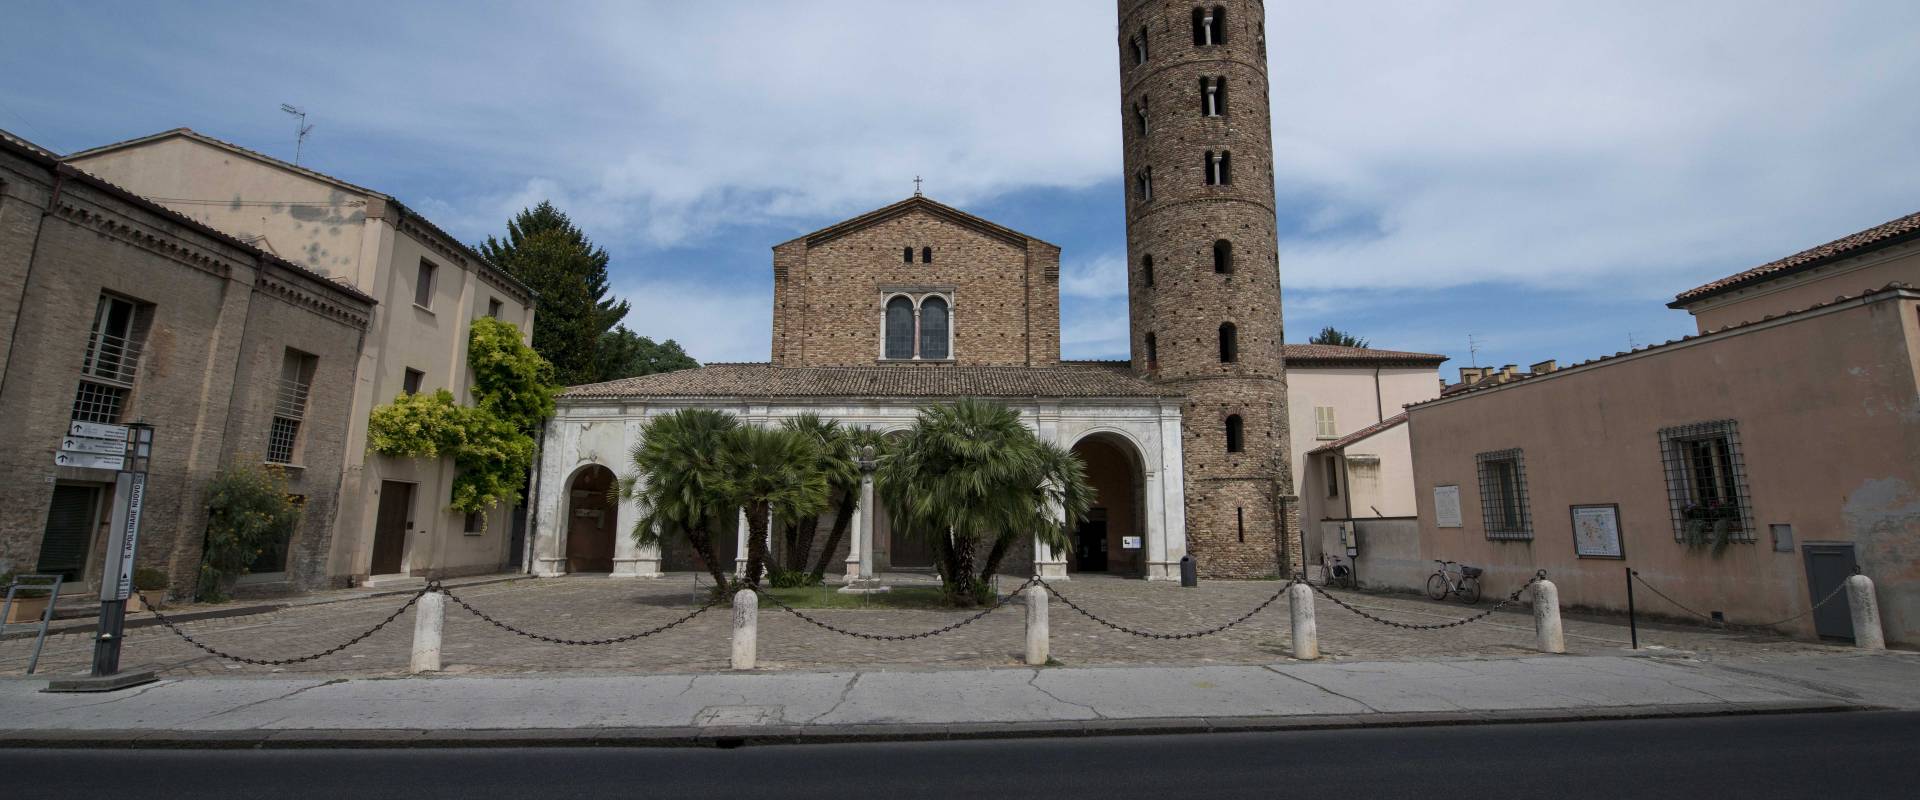 Sant'Apollinare Nuovo frontale photo by Wwikiwalter